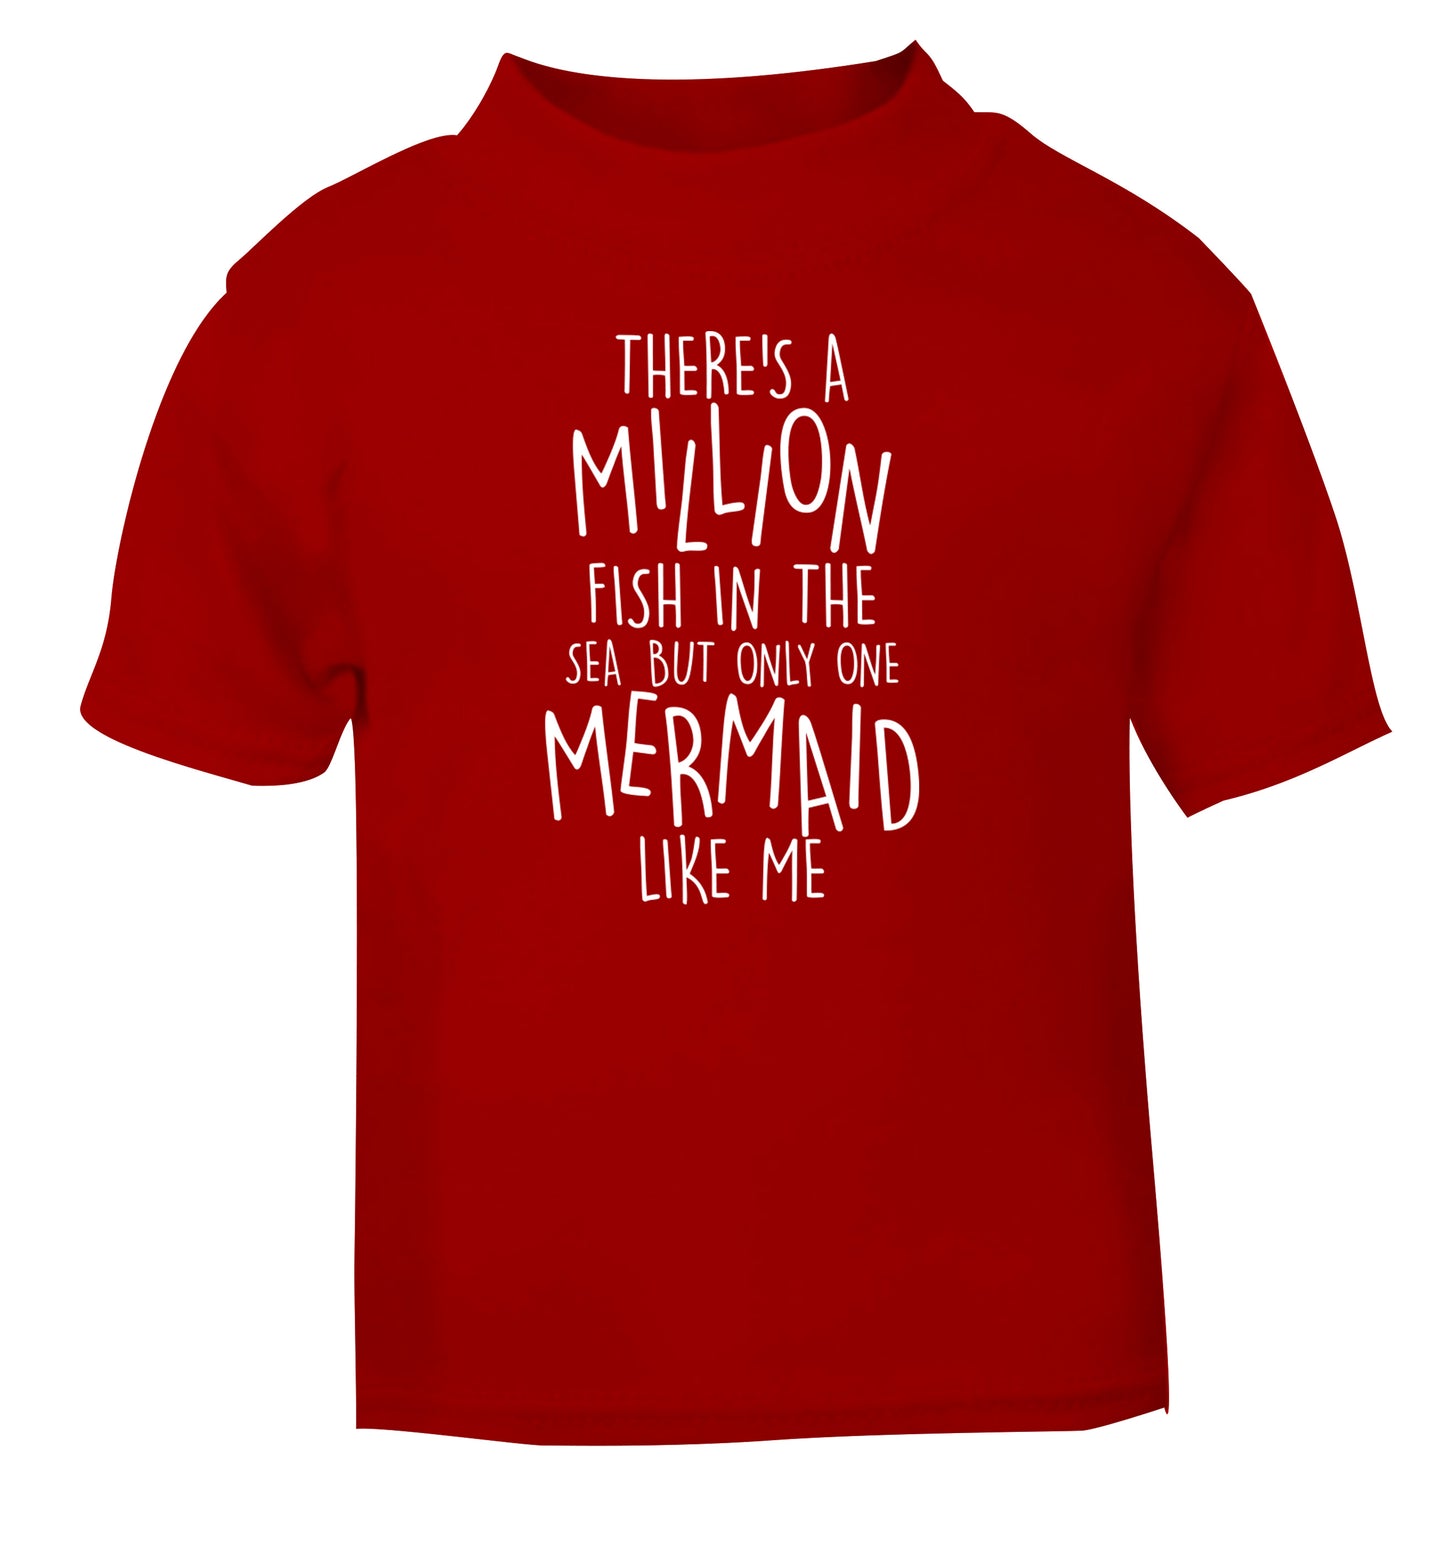 There's a million fish in the sea but only one mermaid like me red Baby Toddler Tshirt 2 Years